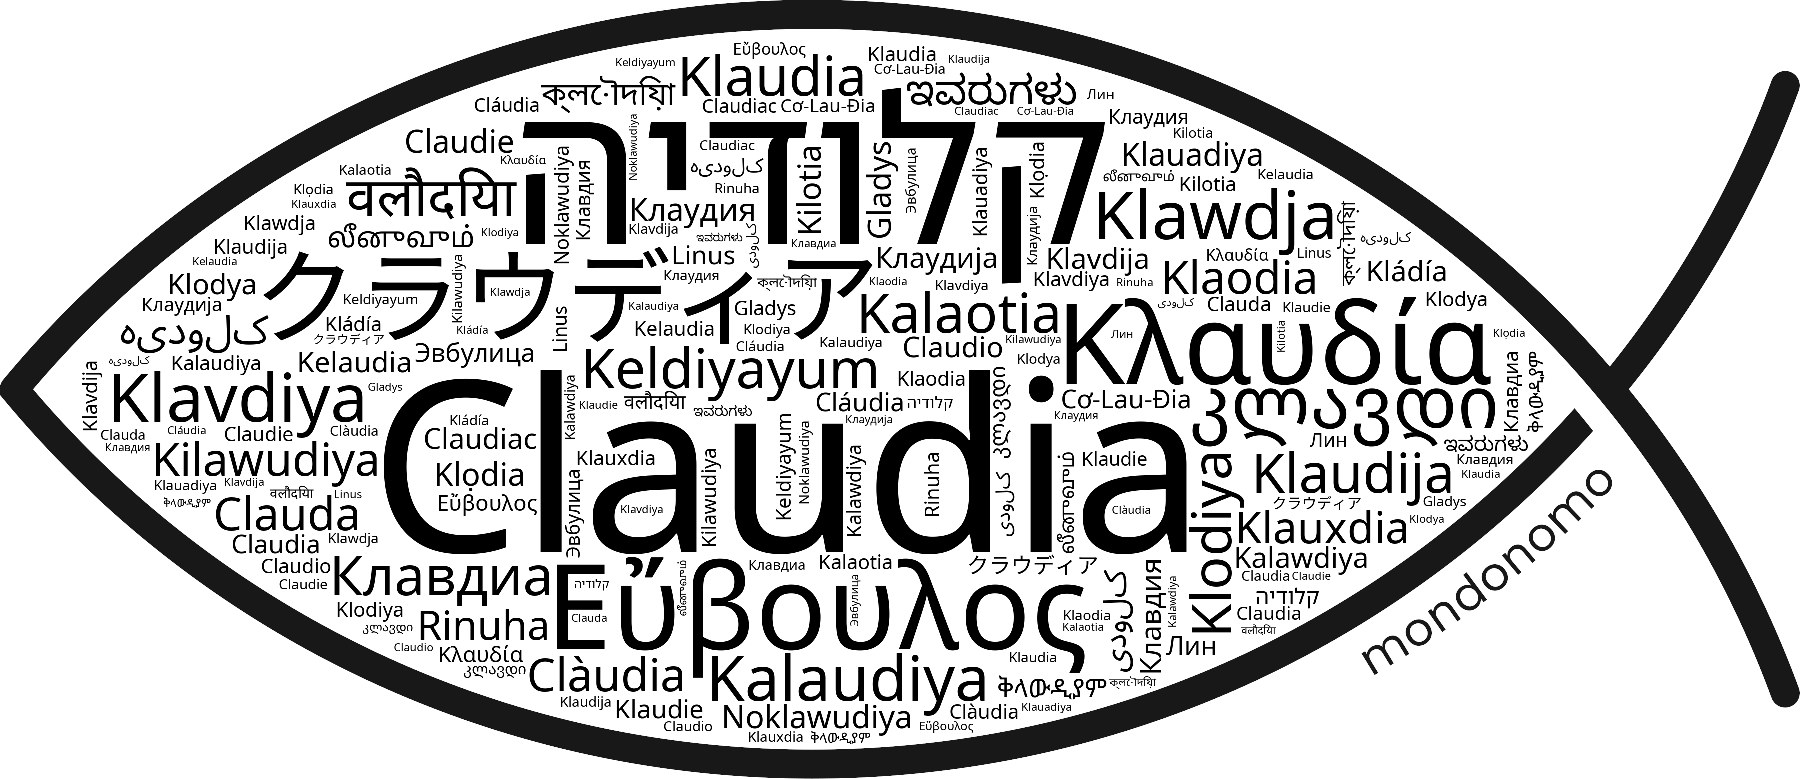 Name Claudia in the world's Bibles